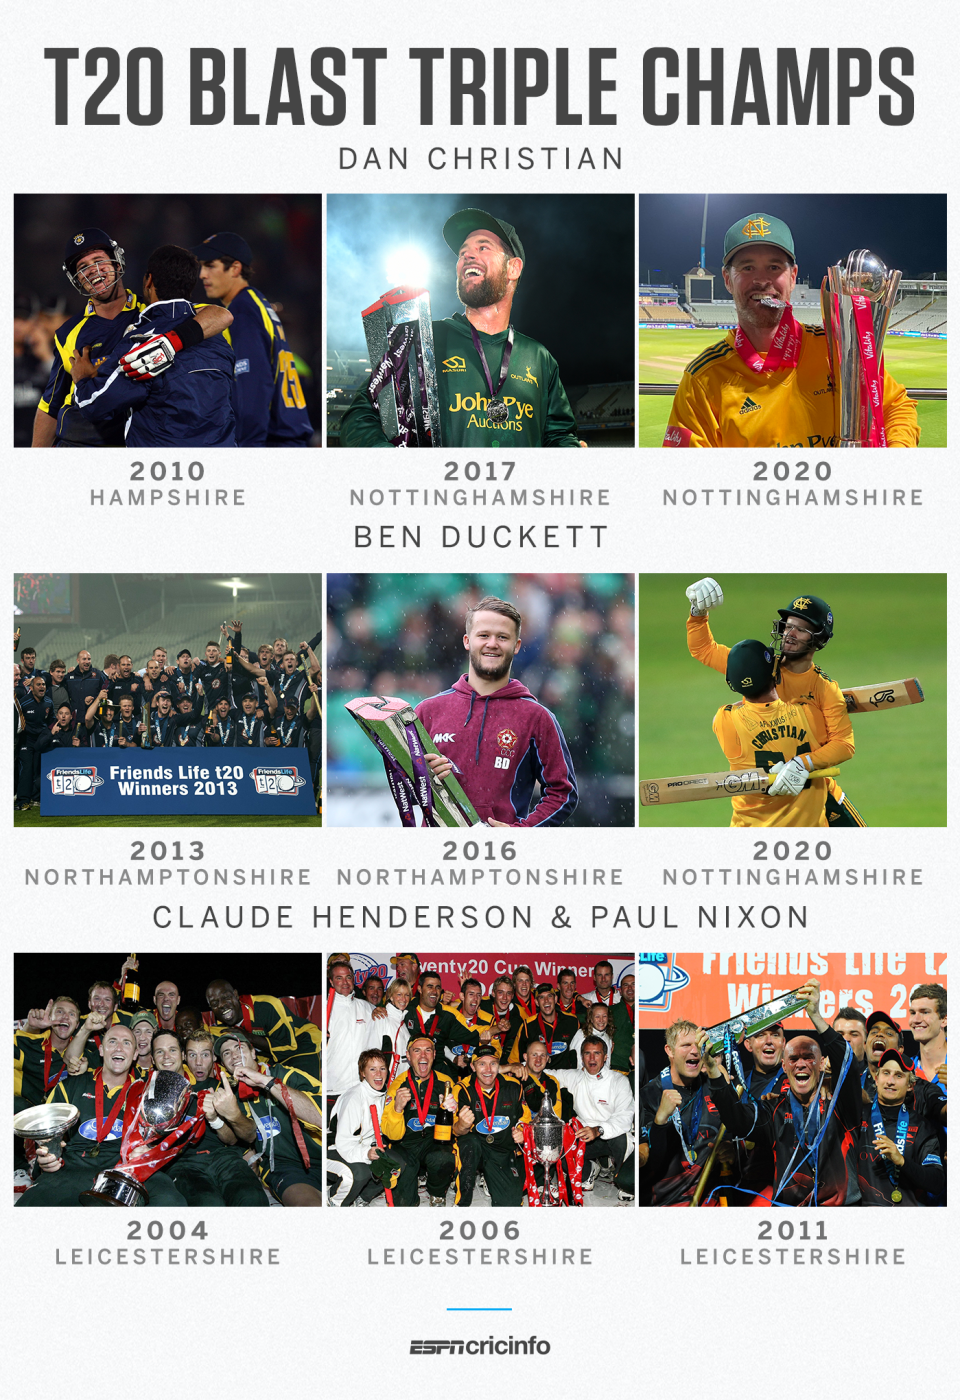 Dan Christian and Ben Duckett are among a select few to have won three Blast titles